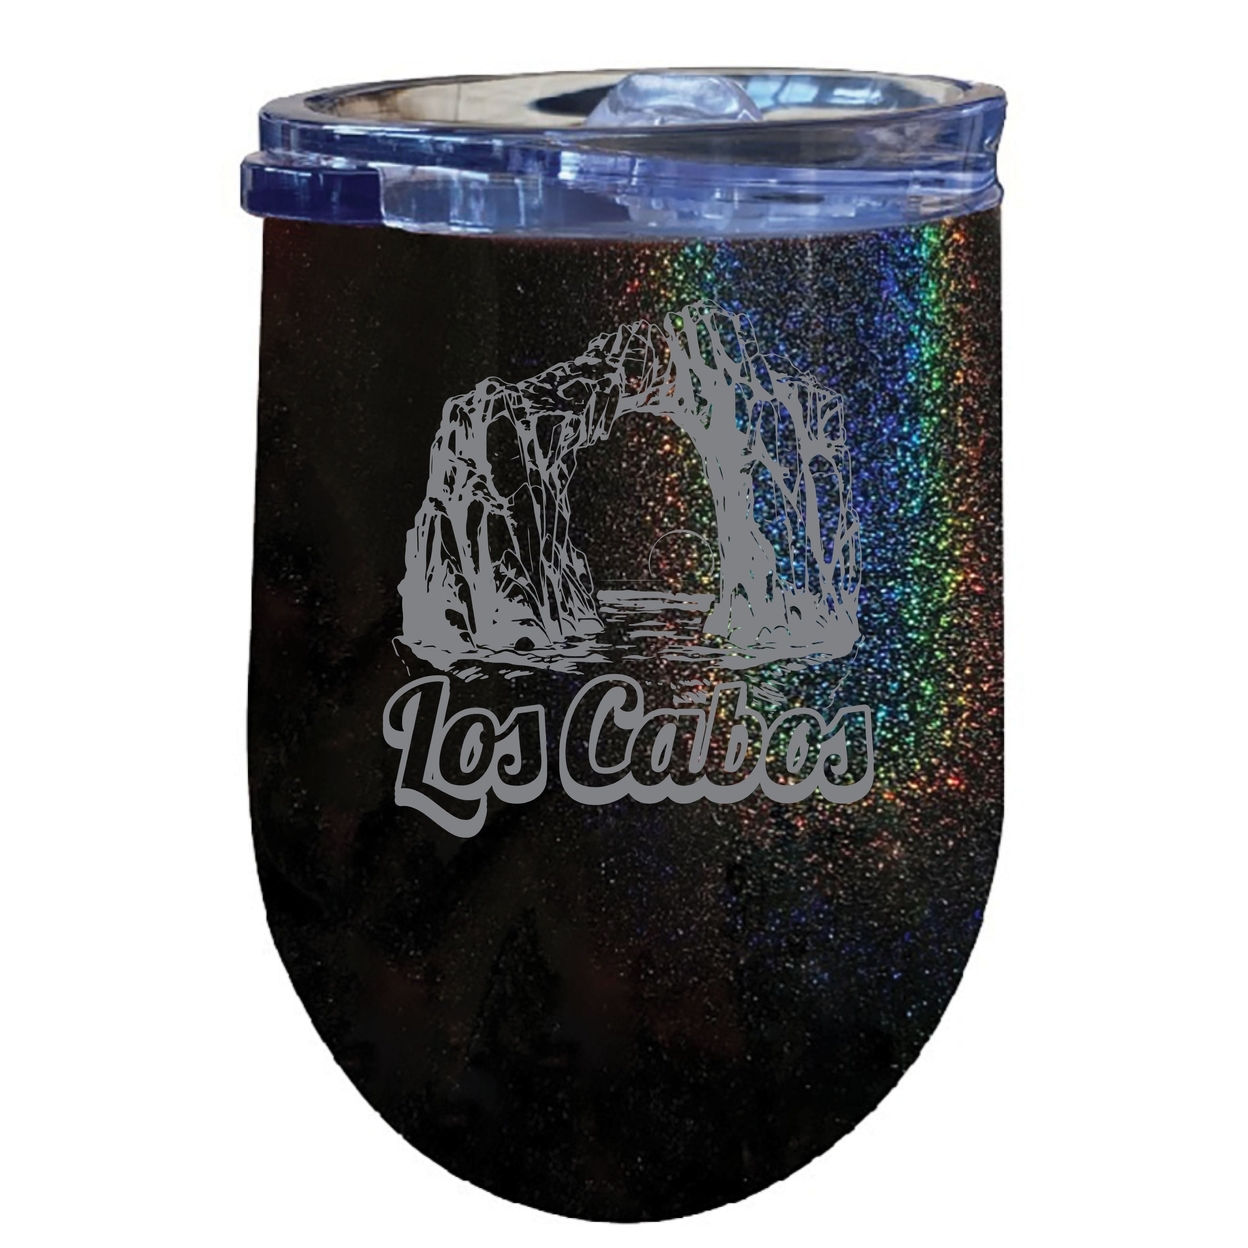 Los Cabos Mexico Souvenir 12 Oz Engraved Insulated Wine Stainless Steel Tumbler - Coral,,Single Unit